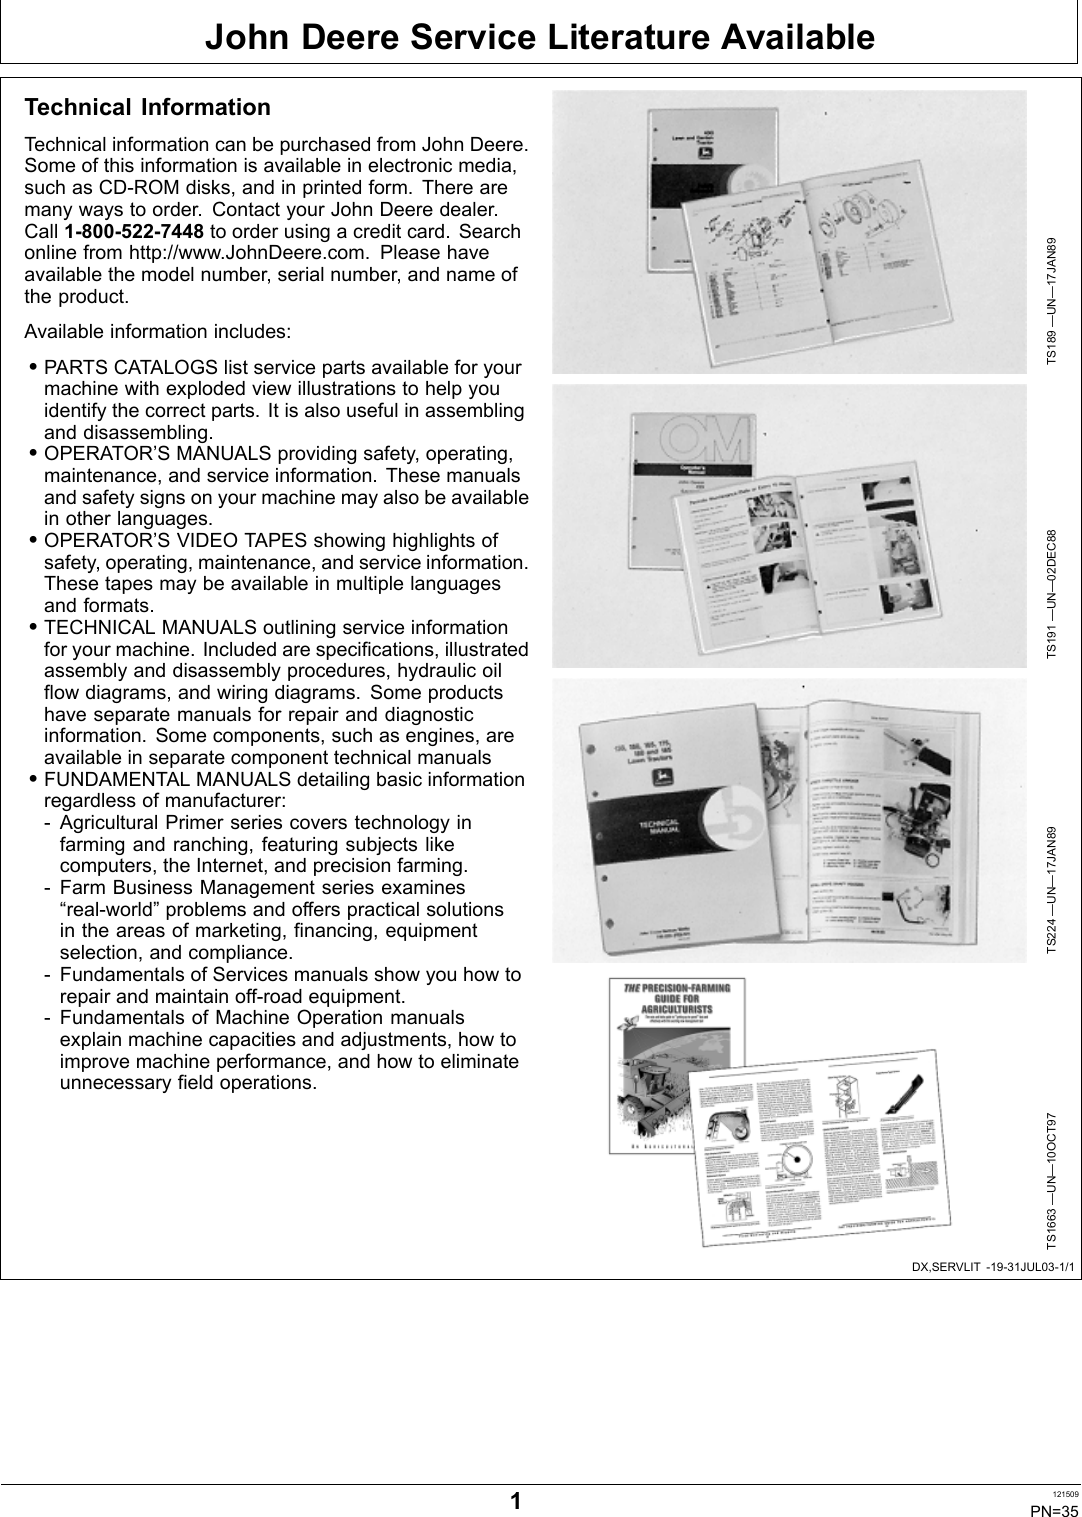 John Deere Service Literature AvailableDX,SERVLIT 1931JUL031/1Technical InformationTechnical information can be purchased from John Deere.Some of this information is available in electronic media,such as CDROM disks, and in printed form. There aremany ways to order. Contact your John Deere dealer.Call 18005227448 to order using a credit card. Searchonline from http://www.JohnDeere.com. Please haveavailable the model number, serial number, and name ofthe product.Available information includes:•PARTS CATALOGS list service parts available for yourmachine with exploded view illustrations to help youidentify the correct parts. It is also useful in assemblingand disassembling.•OPERATOR’S MANUALS providing safety, operating,maintenance, and service information. These manualsand safety signs on your machine may also be availablein other languages.•OPERATOR’S VIDEO TAPES showing highlights ofsafety, operating, maintenance, and service information.These tapes may be available in multiple languagesand formats.•TECHNICAL MANUALS outlining service informationfor your machine. Included are specifications, illustratedassembly and disassembly procedures, hydraulic oilflow diagrams, and wiring diagrams. Some productshave separate manuals for repair and diagnosticinformation. Some components, such as engines, areavailable in separate component technical manuals•FUNDAMENTAL MANUALS detailing basic informationregardless of manufacturer: Agricultural Primer series covers technology infarming and ranching, featuring subjects likecomputers, the Internet, and precision farming. Farm Business Management series examines“realworld” problems and offers practical solutionsin the areas of marketing, financing, equipmentselection, and compliance. Fundamentals of Services manuals show you how torepair and maintain offroad equipment. Fundamentals of Machine Operation manualsexplain machine capacities and adjustments, how toimprove machine performance, and how to eliminateunnecessary field operations.TS189 —UN—17JAN89TS191 —UN—02DEC88TS224 —UN—17JAN89TS1663 —UN—10OCT971121509PN=35